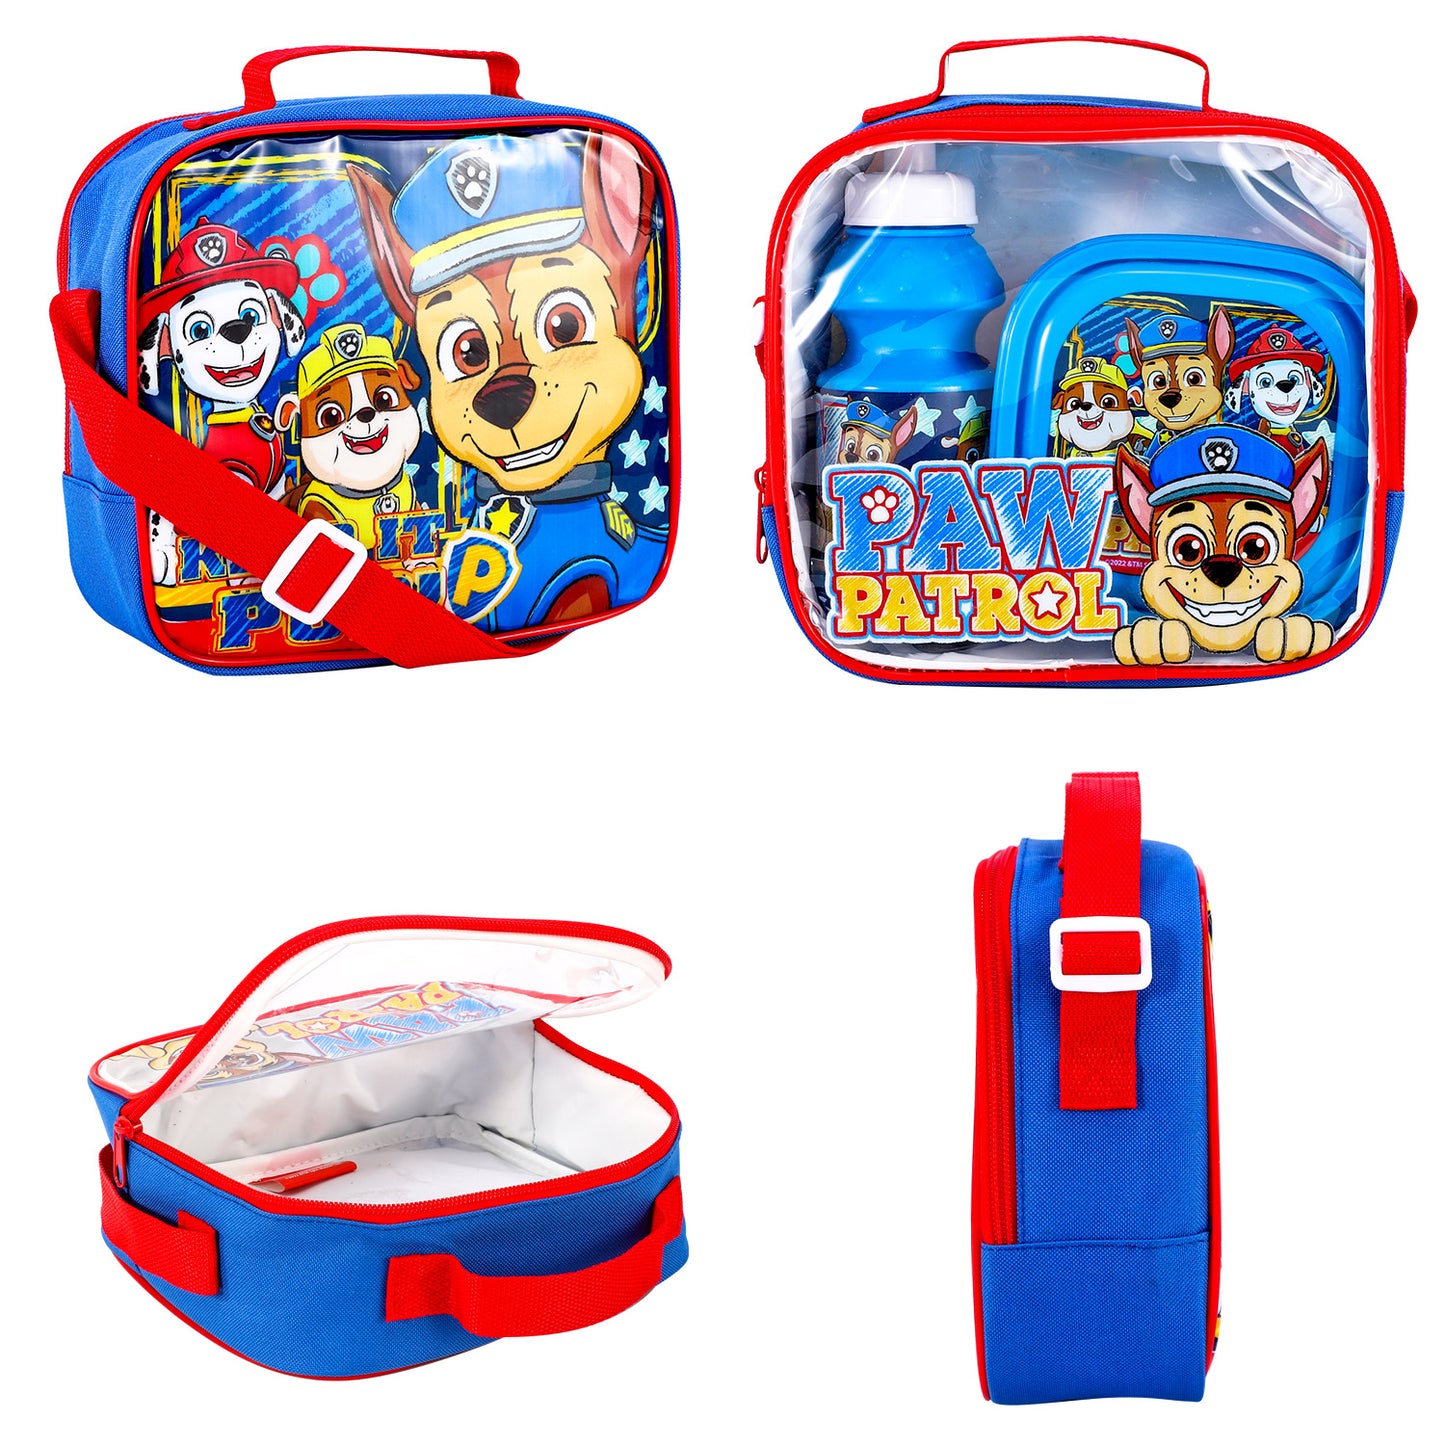 Paw Patrol 3Pc Lunch Set, Lunch Bag, Plastic Bottle, Storage Container School Day